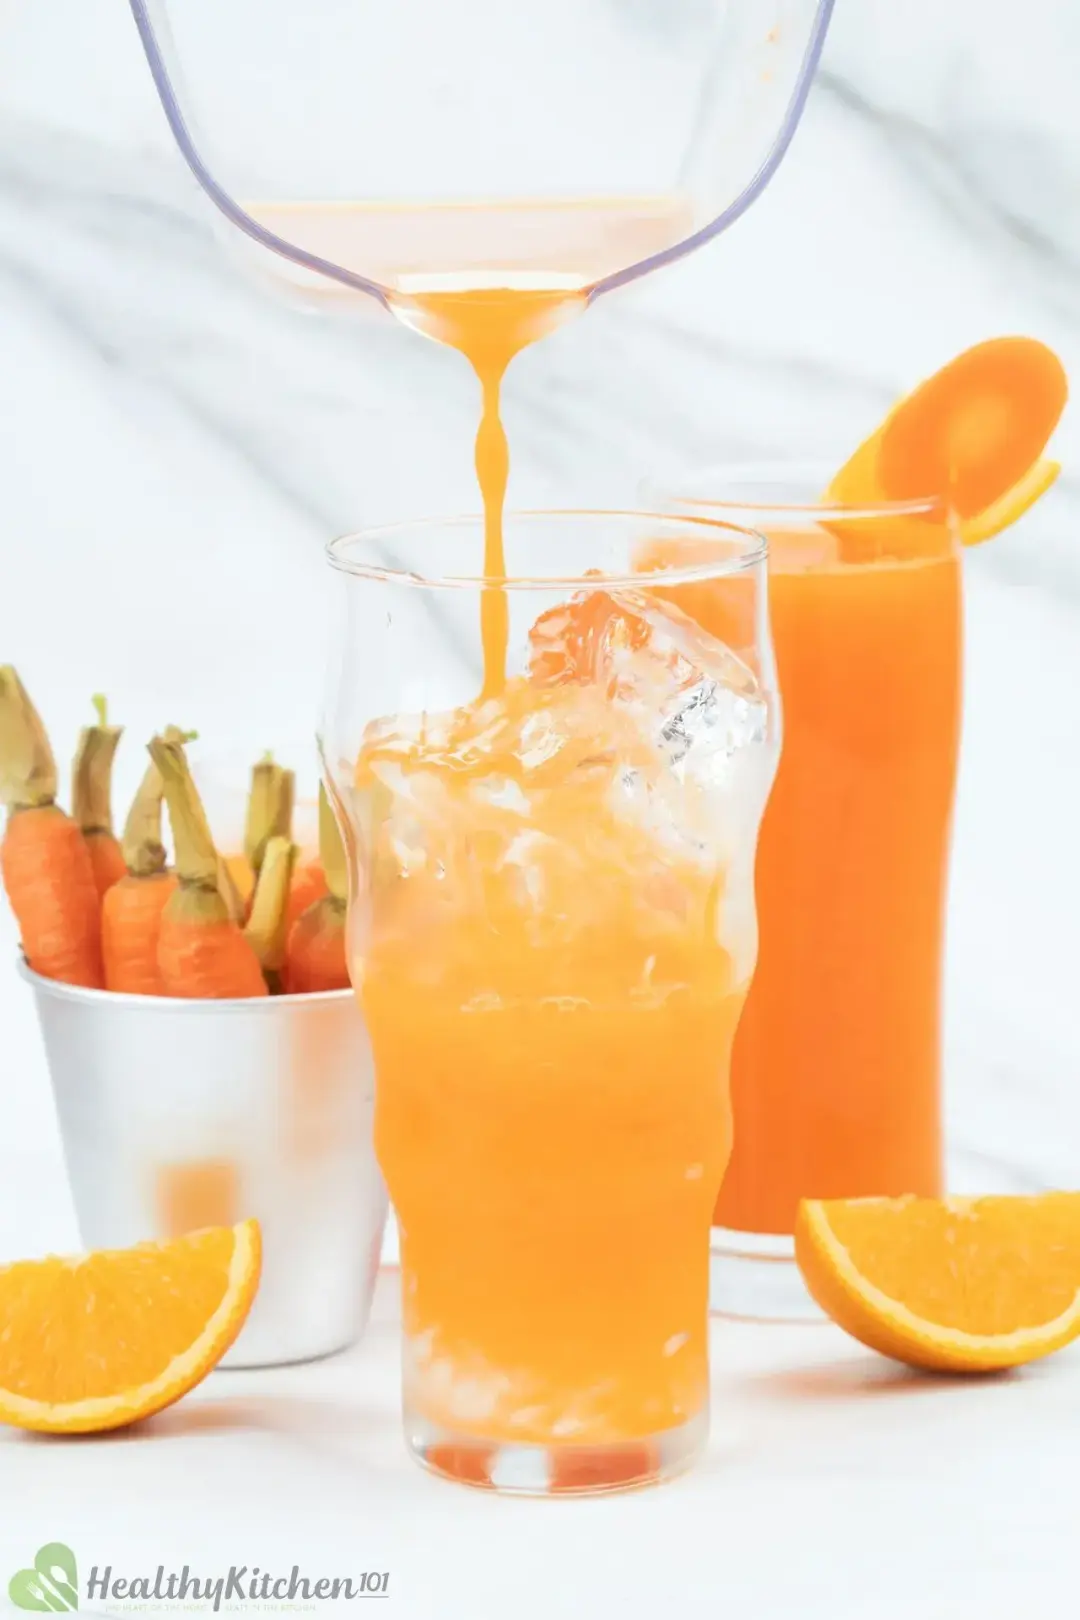 A glass pitcher pouring an orange drink into an iced glass, next to an orange glass, orange wedges, and baby carrots